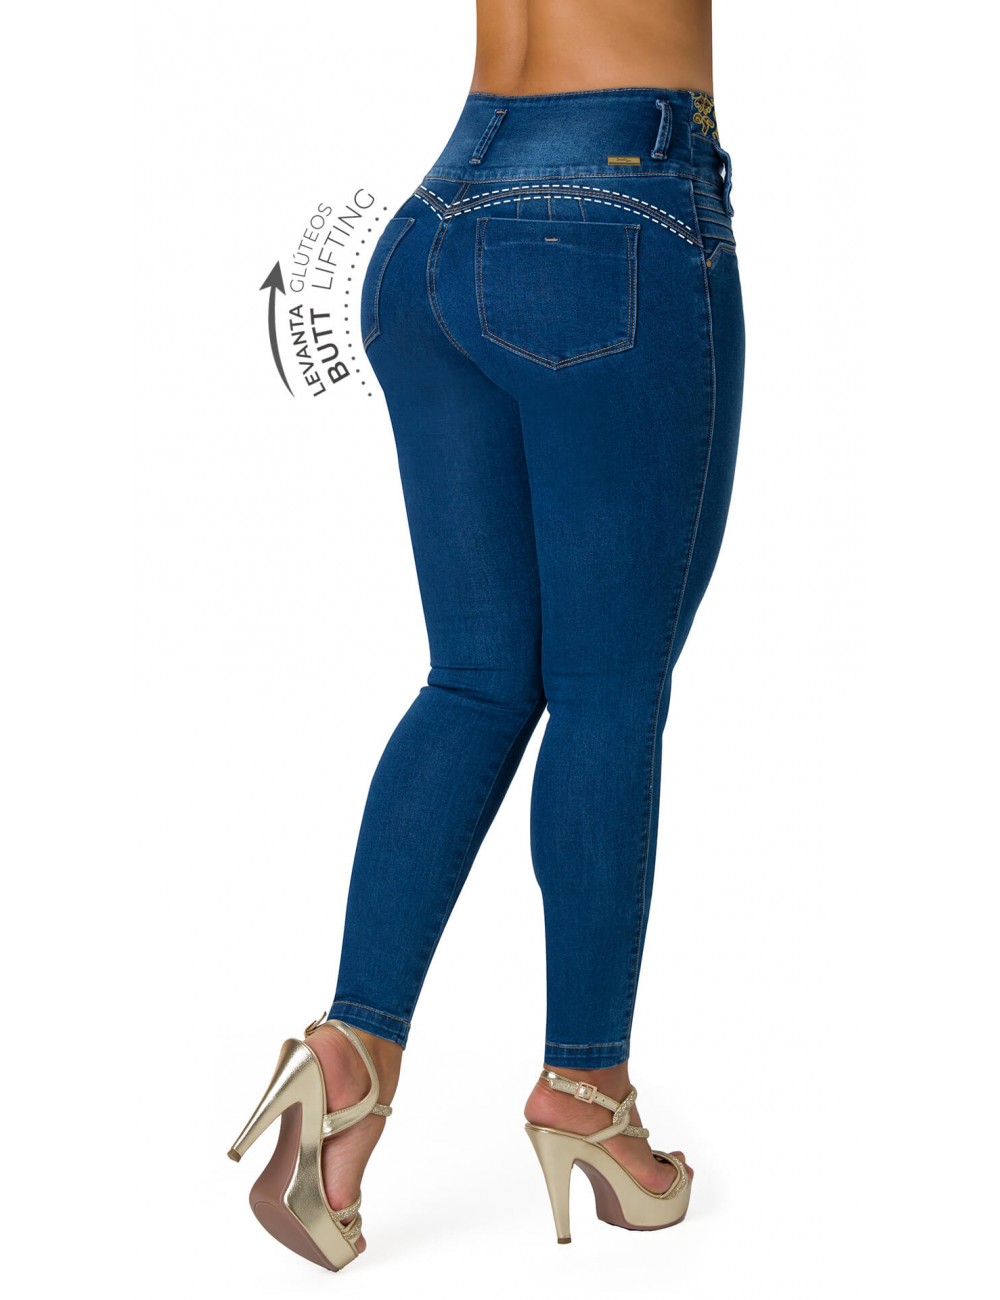 High Rise Butt Lifting Jeans With Embroidery 21332PAP-B